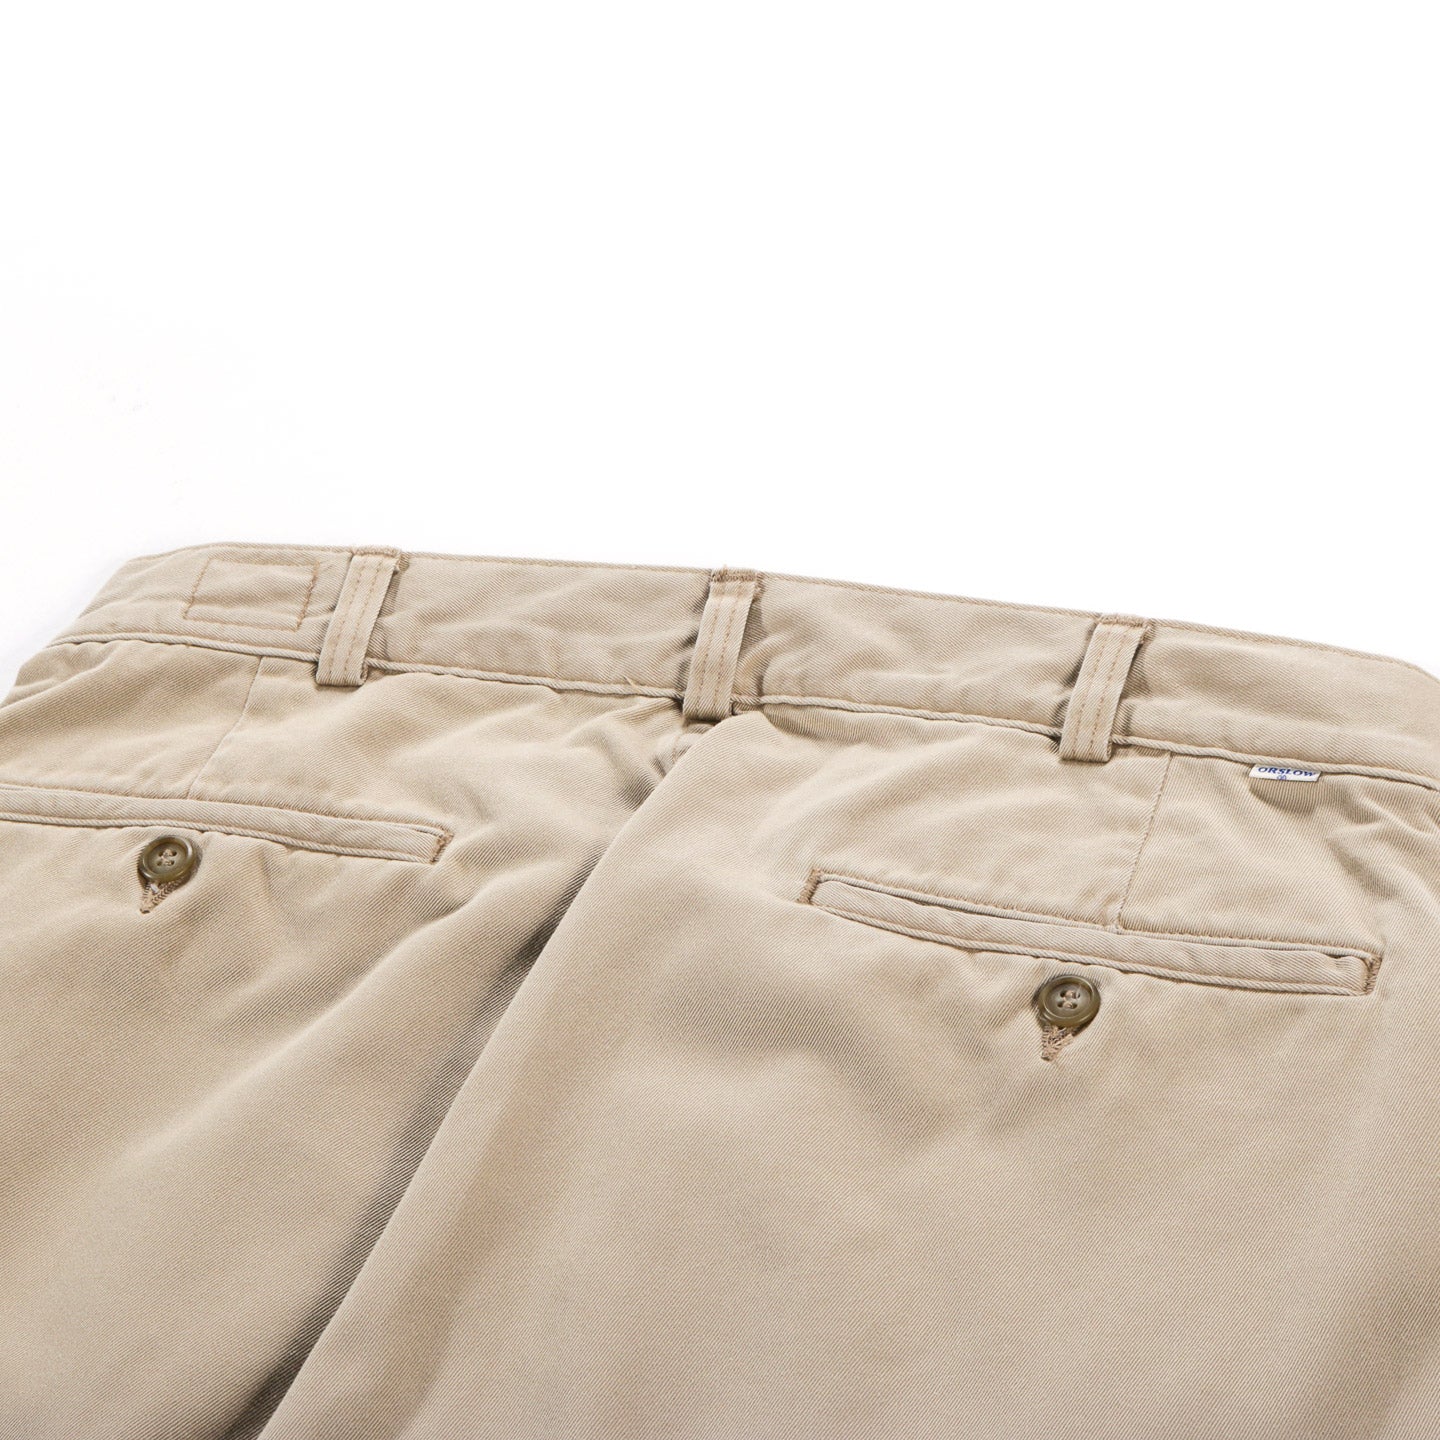 ORSLOW TWO TUCK WIDE TROUSERS KHAKI